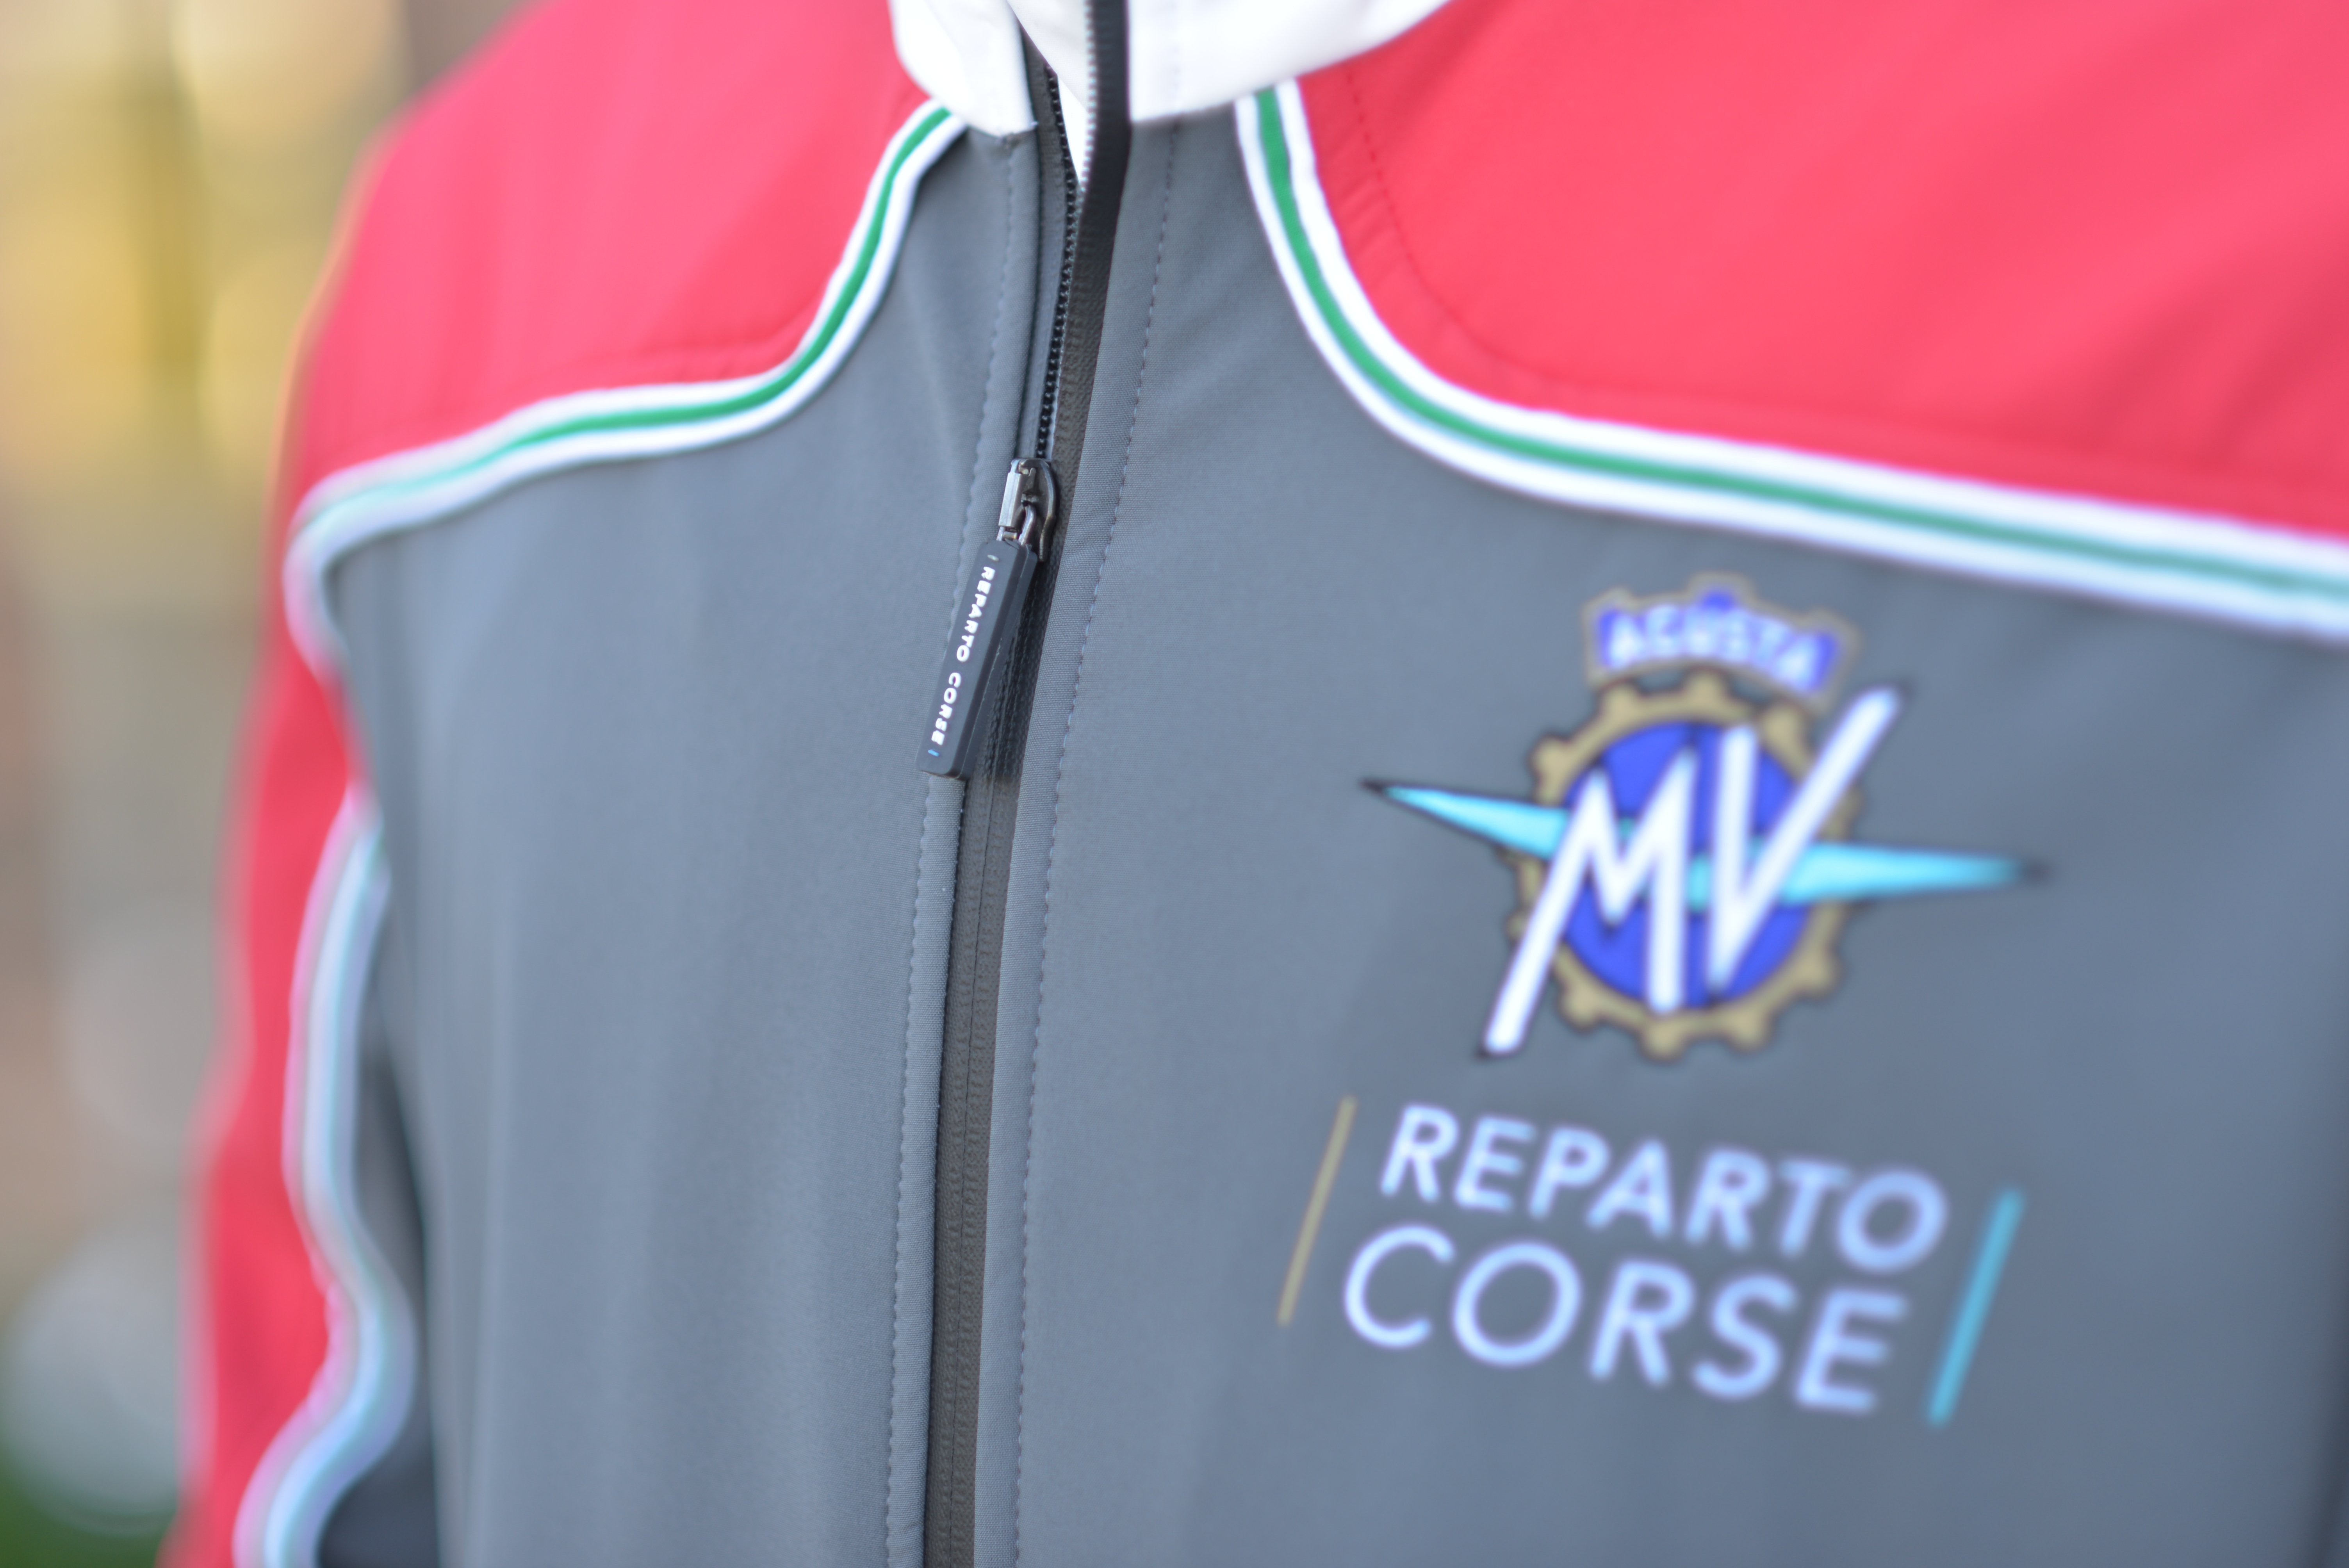 AUDES and MV Agusta Reparto Corse: a new collection after the exclusive worldwide license agreement for the next 3 years